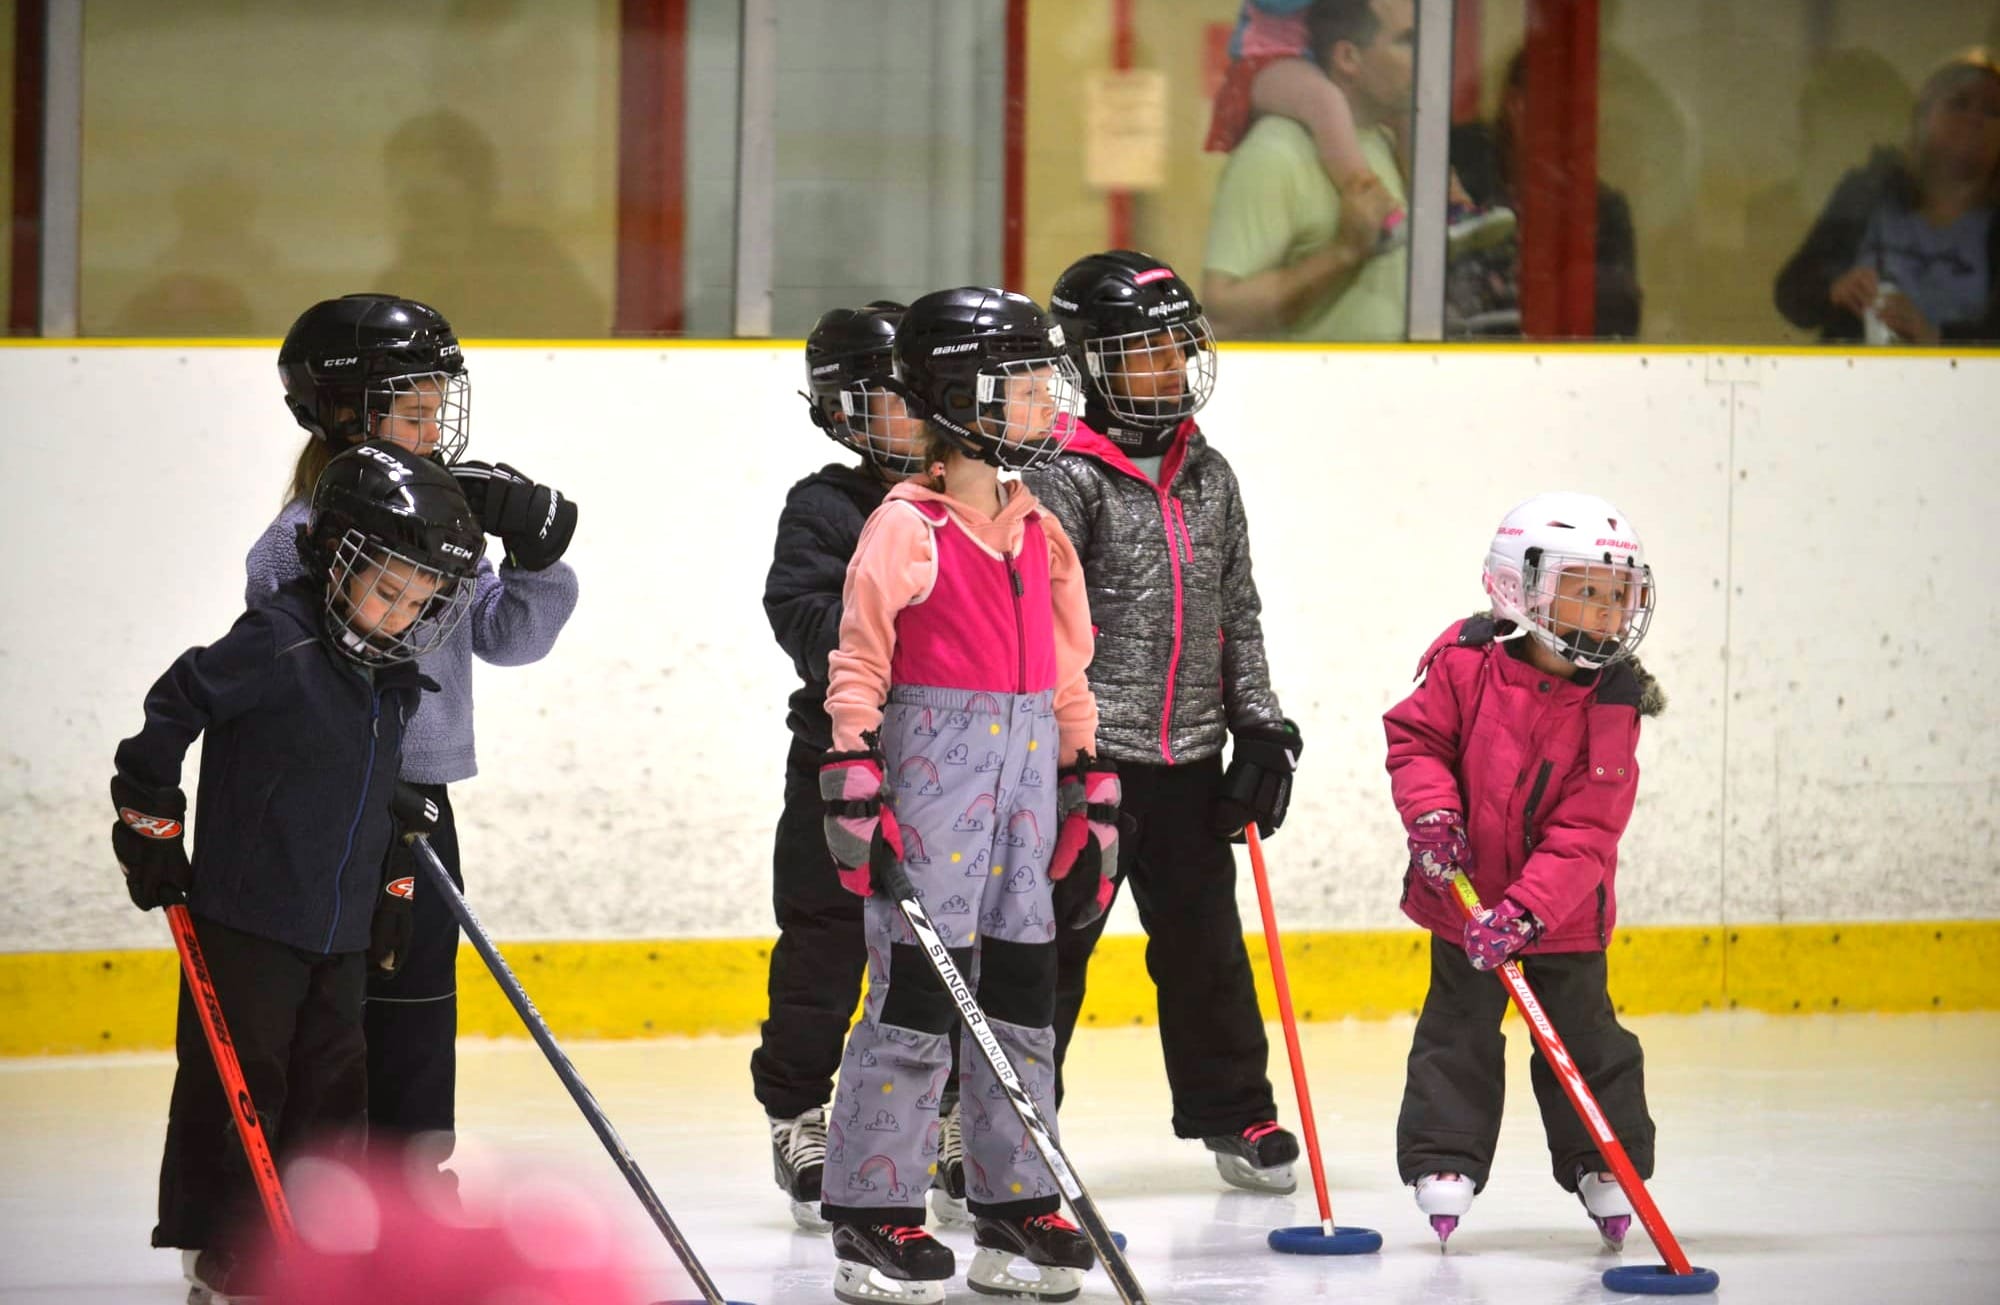 Waterloo Ringette Association hosts come-and-try events